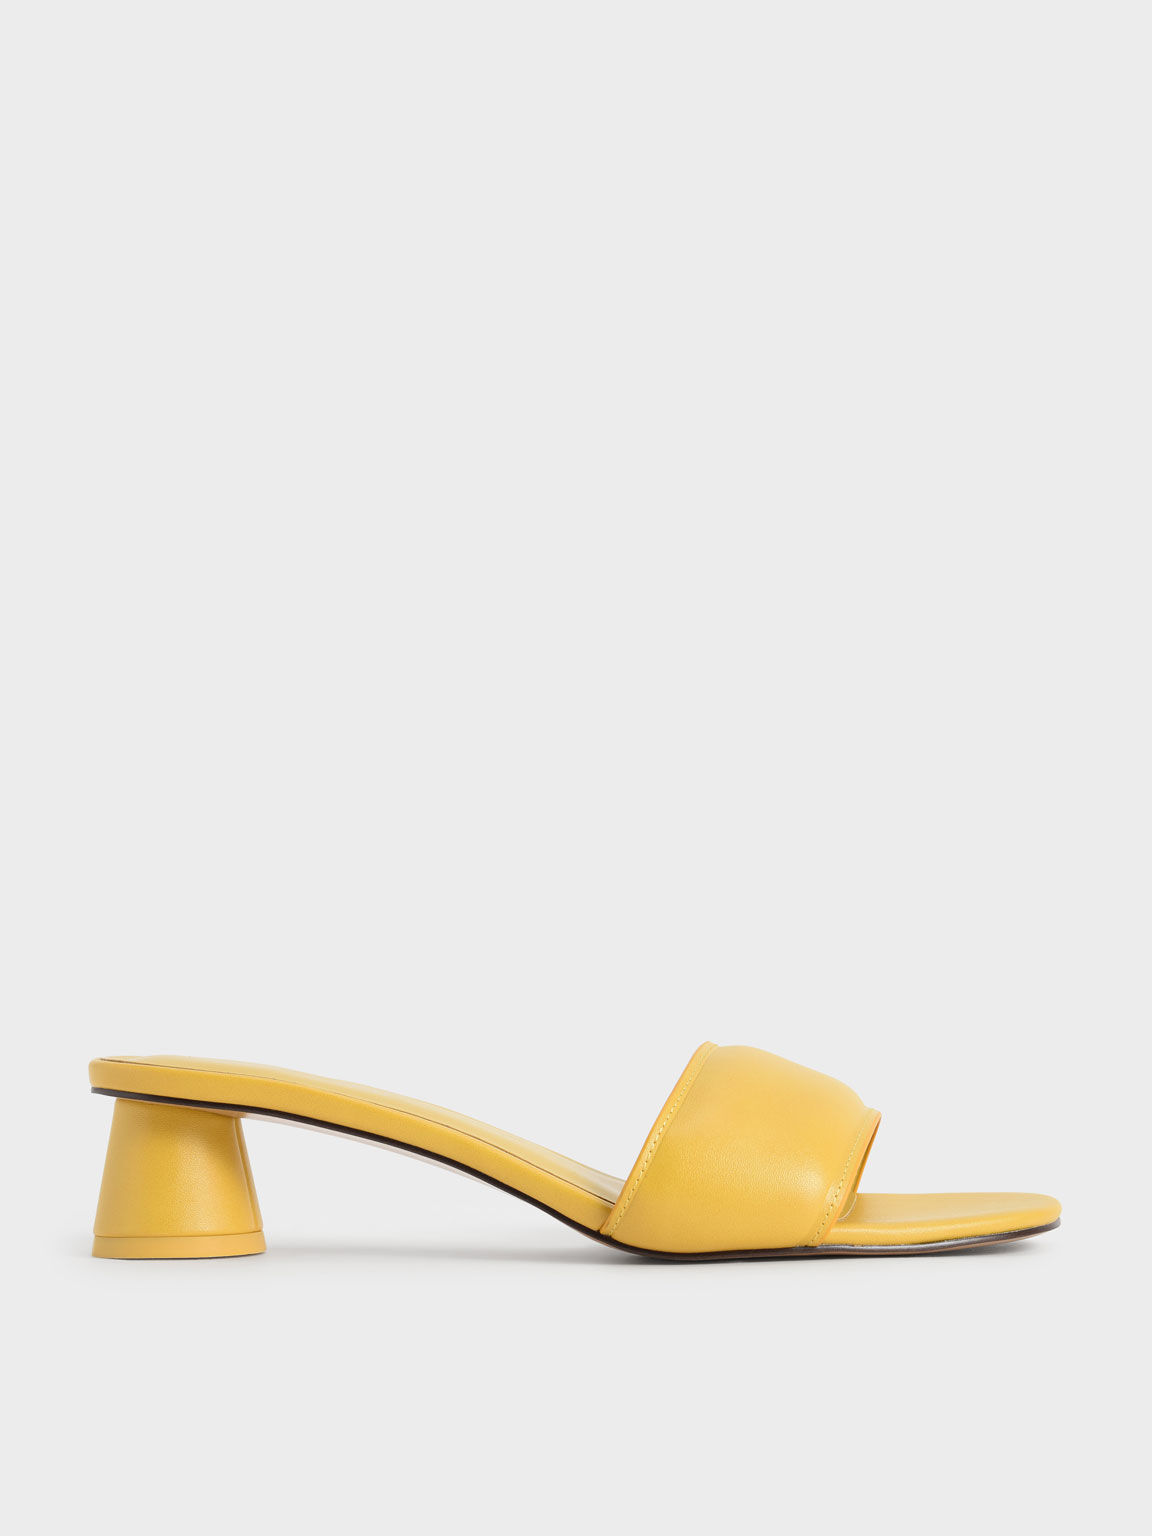 Sandal Puffy Cylindrical Heel Mules, Mustard, hi-res